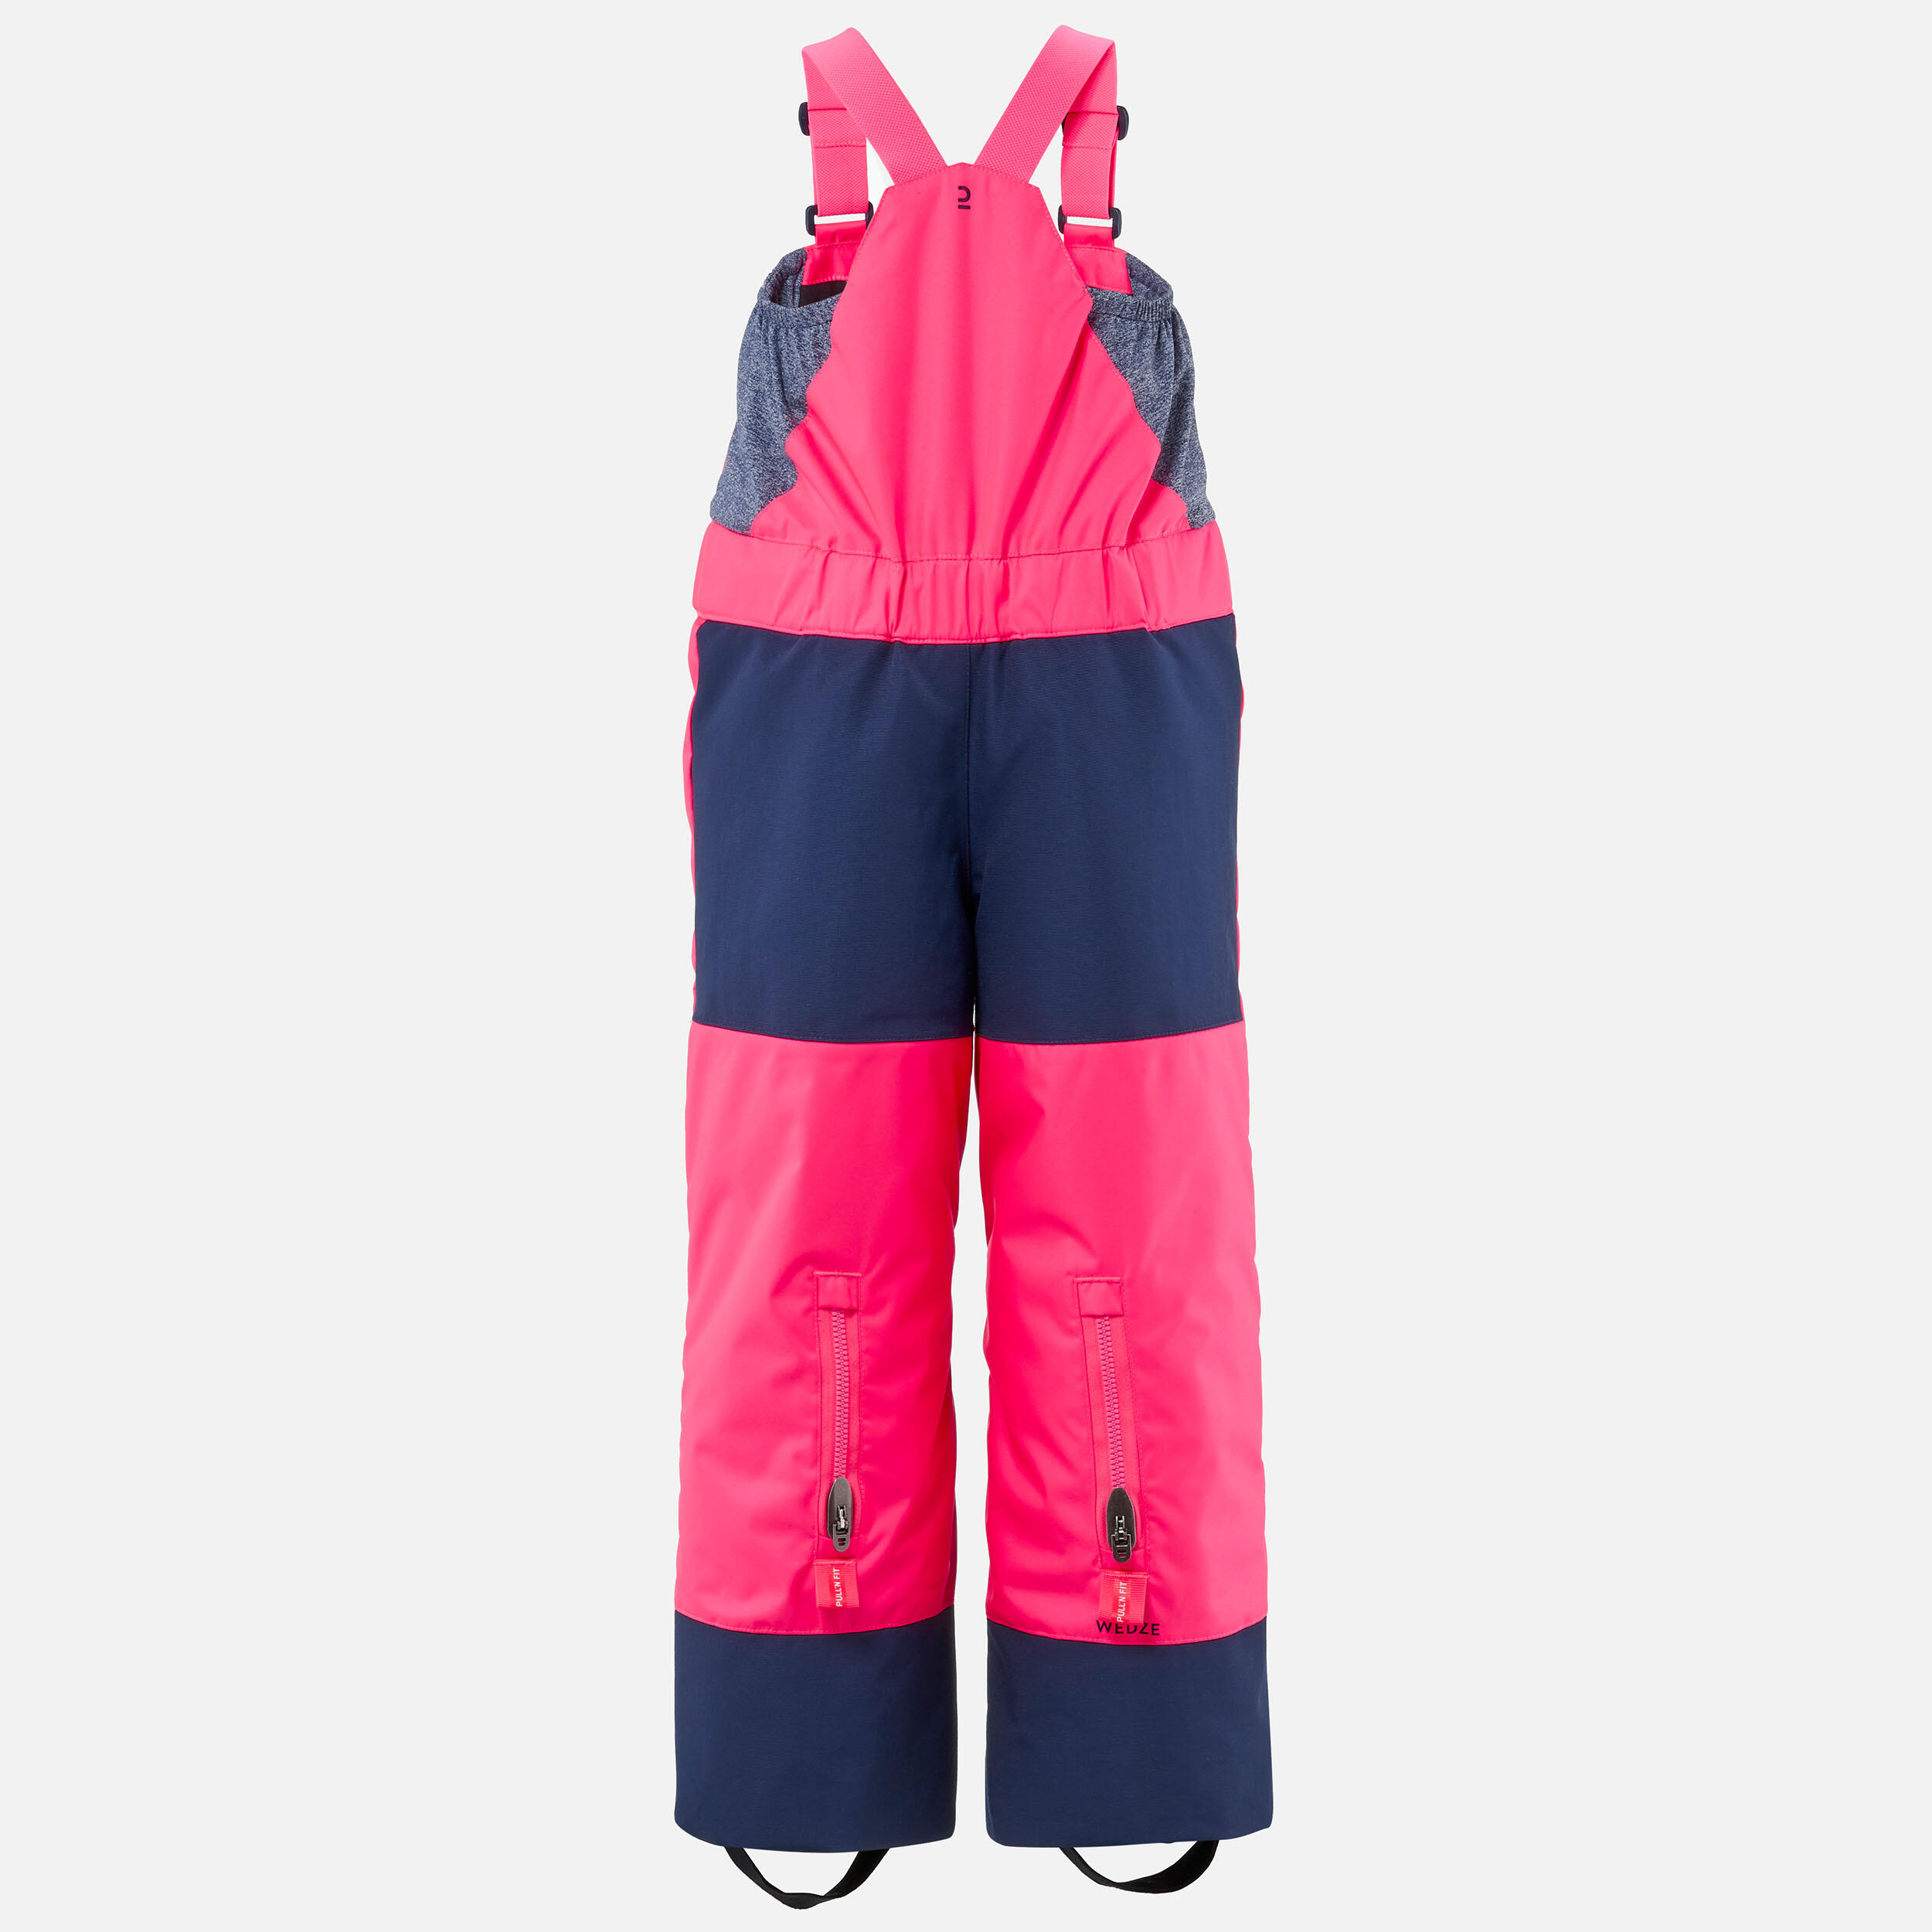 KIDS’ WARM AND WATERPROOF SKI DUNGAREES - 500 PNF - NEON PINK AND NAVY  3/6